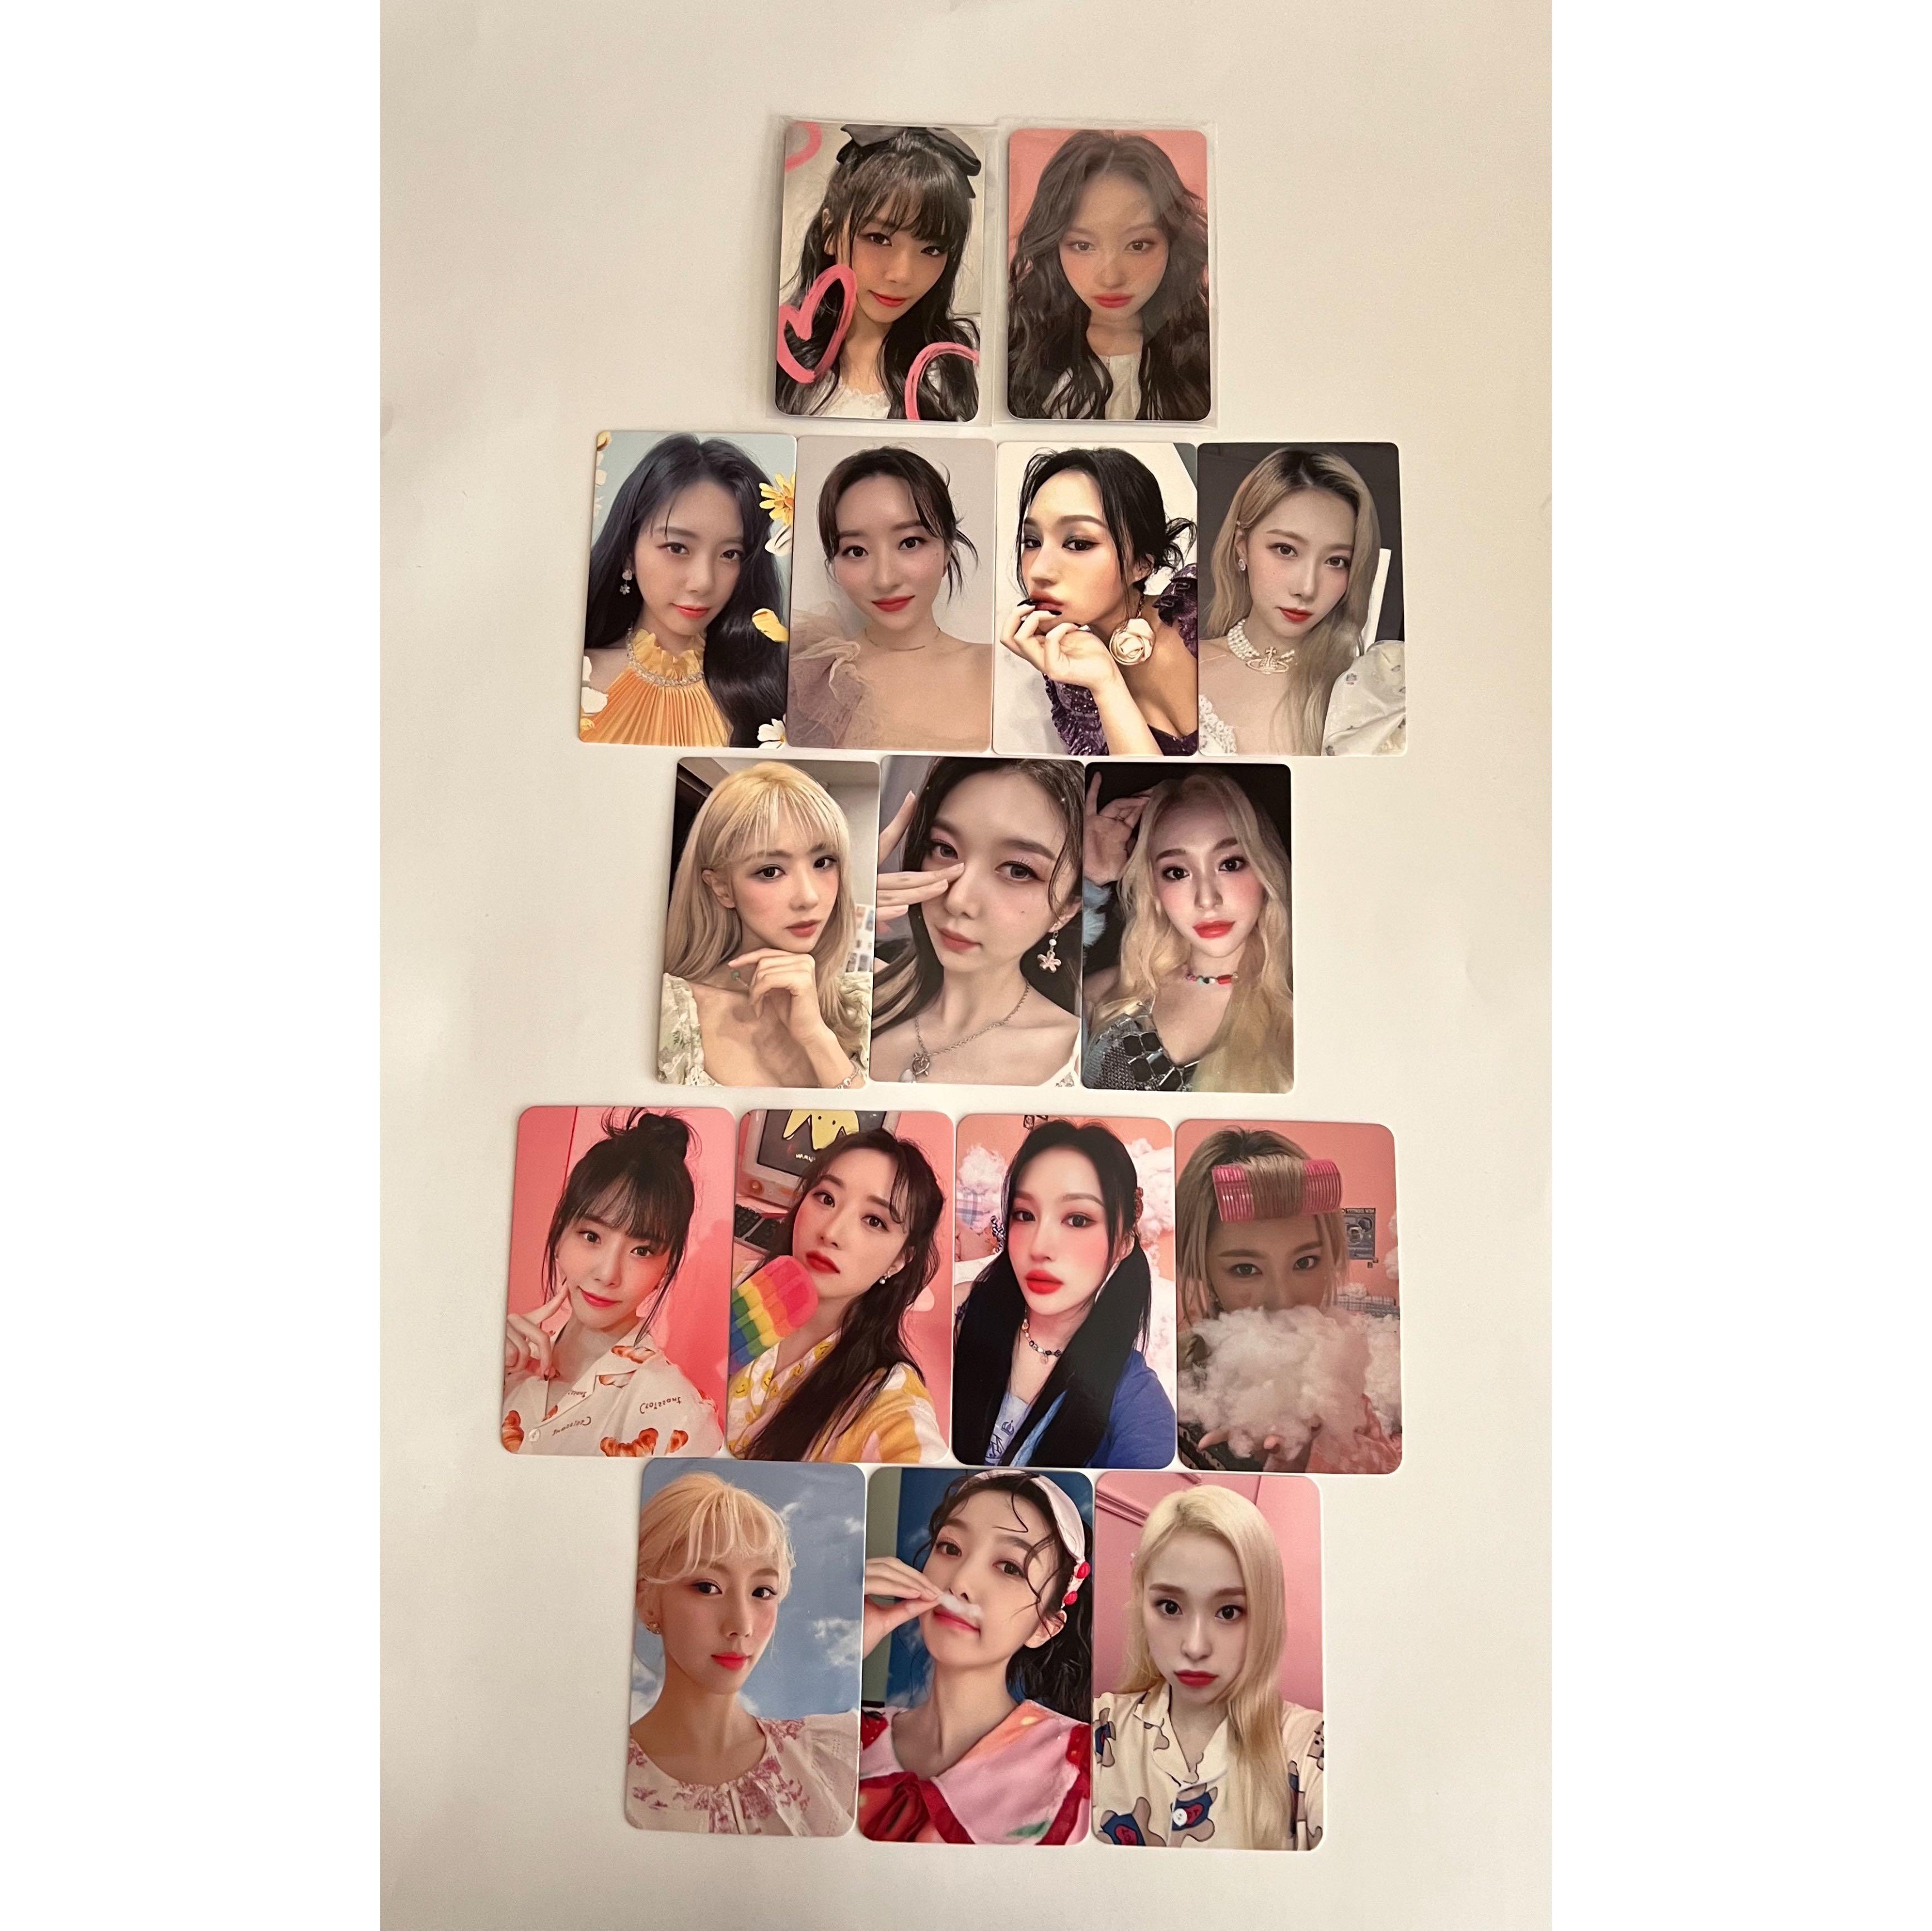 WTS Dreamcatcher Season Greetings Pob Photocard Hobbies Toys Collectibles